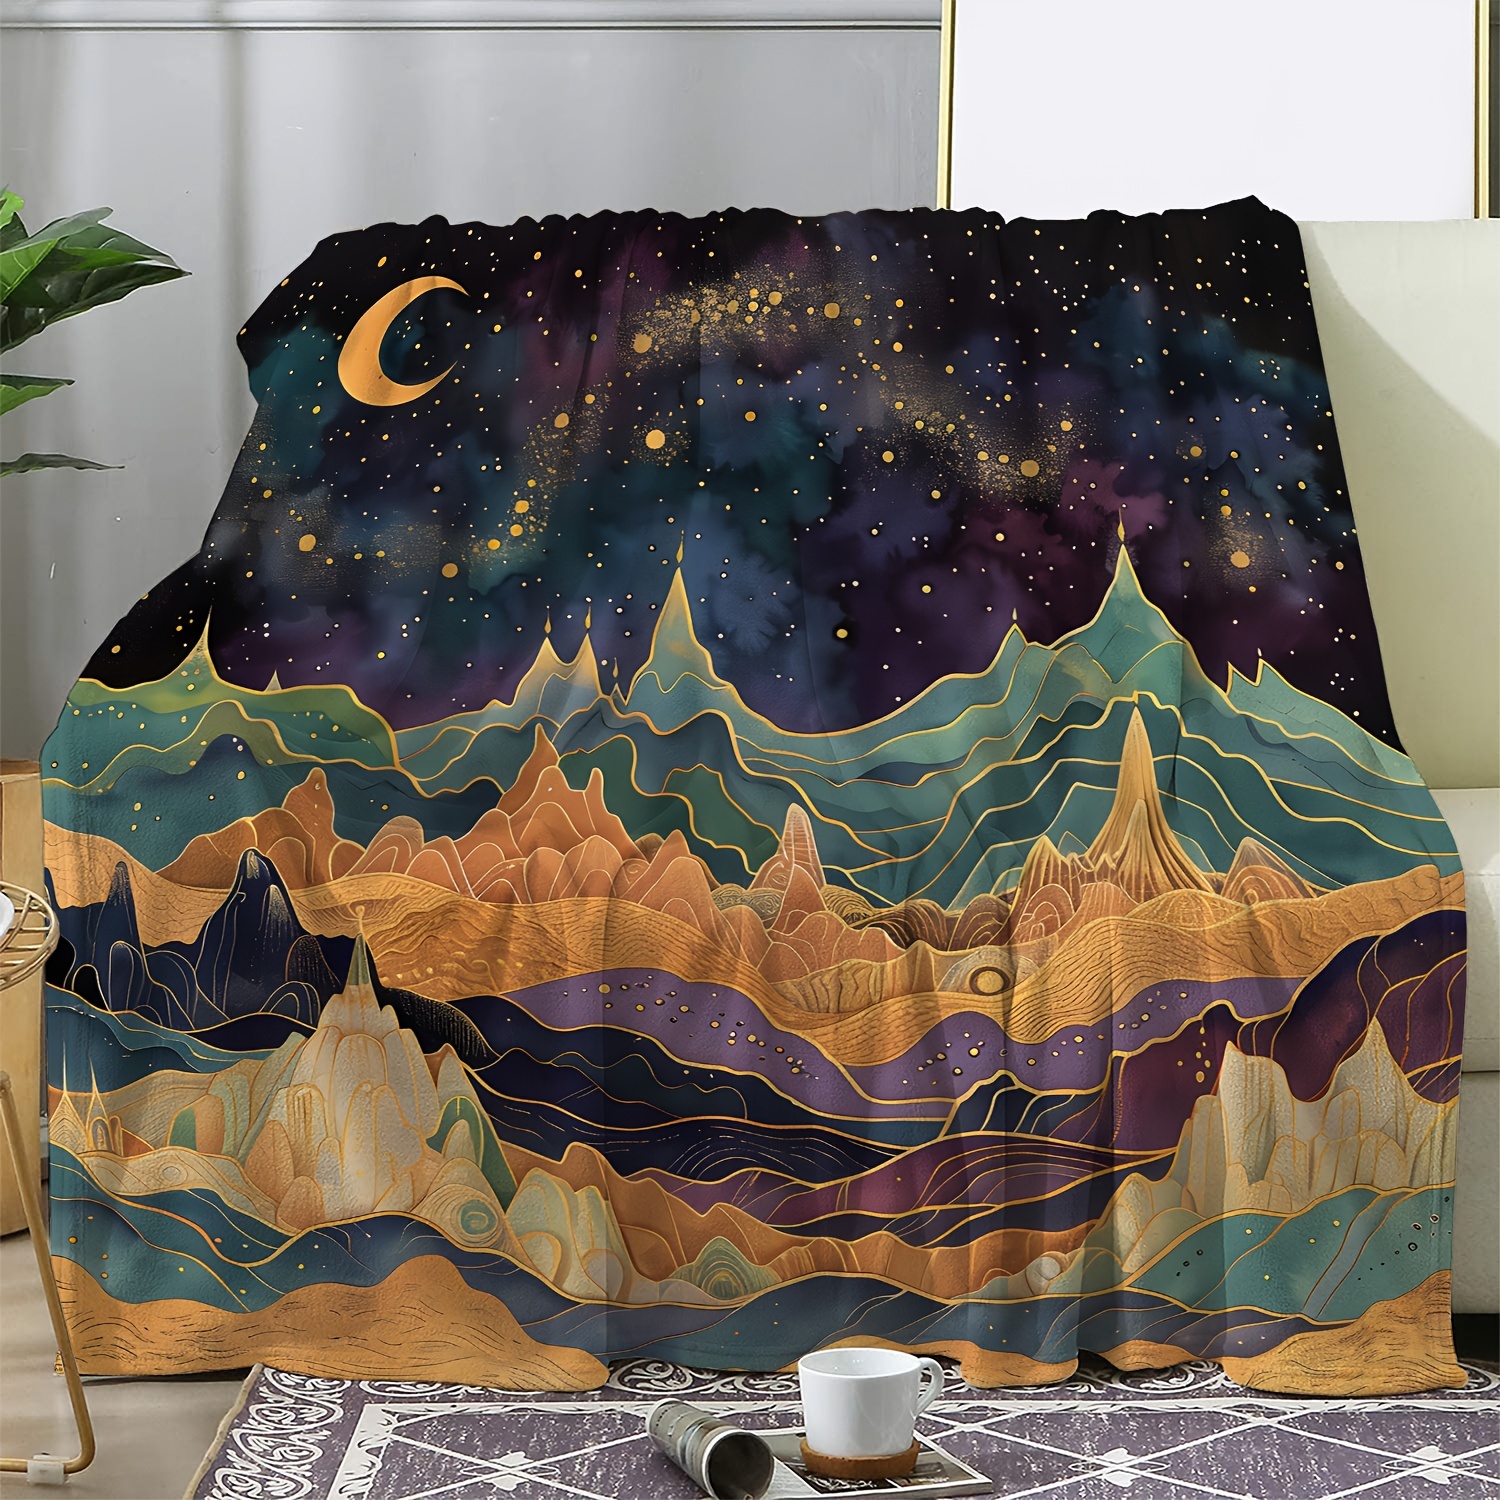 

Cozy & Starry Sky Moon Print Flannel Blanket - Soft, Warm Throw For Couch, Bed, Car, Office, Camping - All-season Gift Blanket Plush Blanket Fluffy Blanket